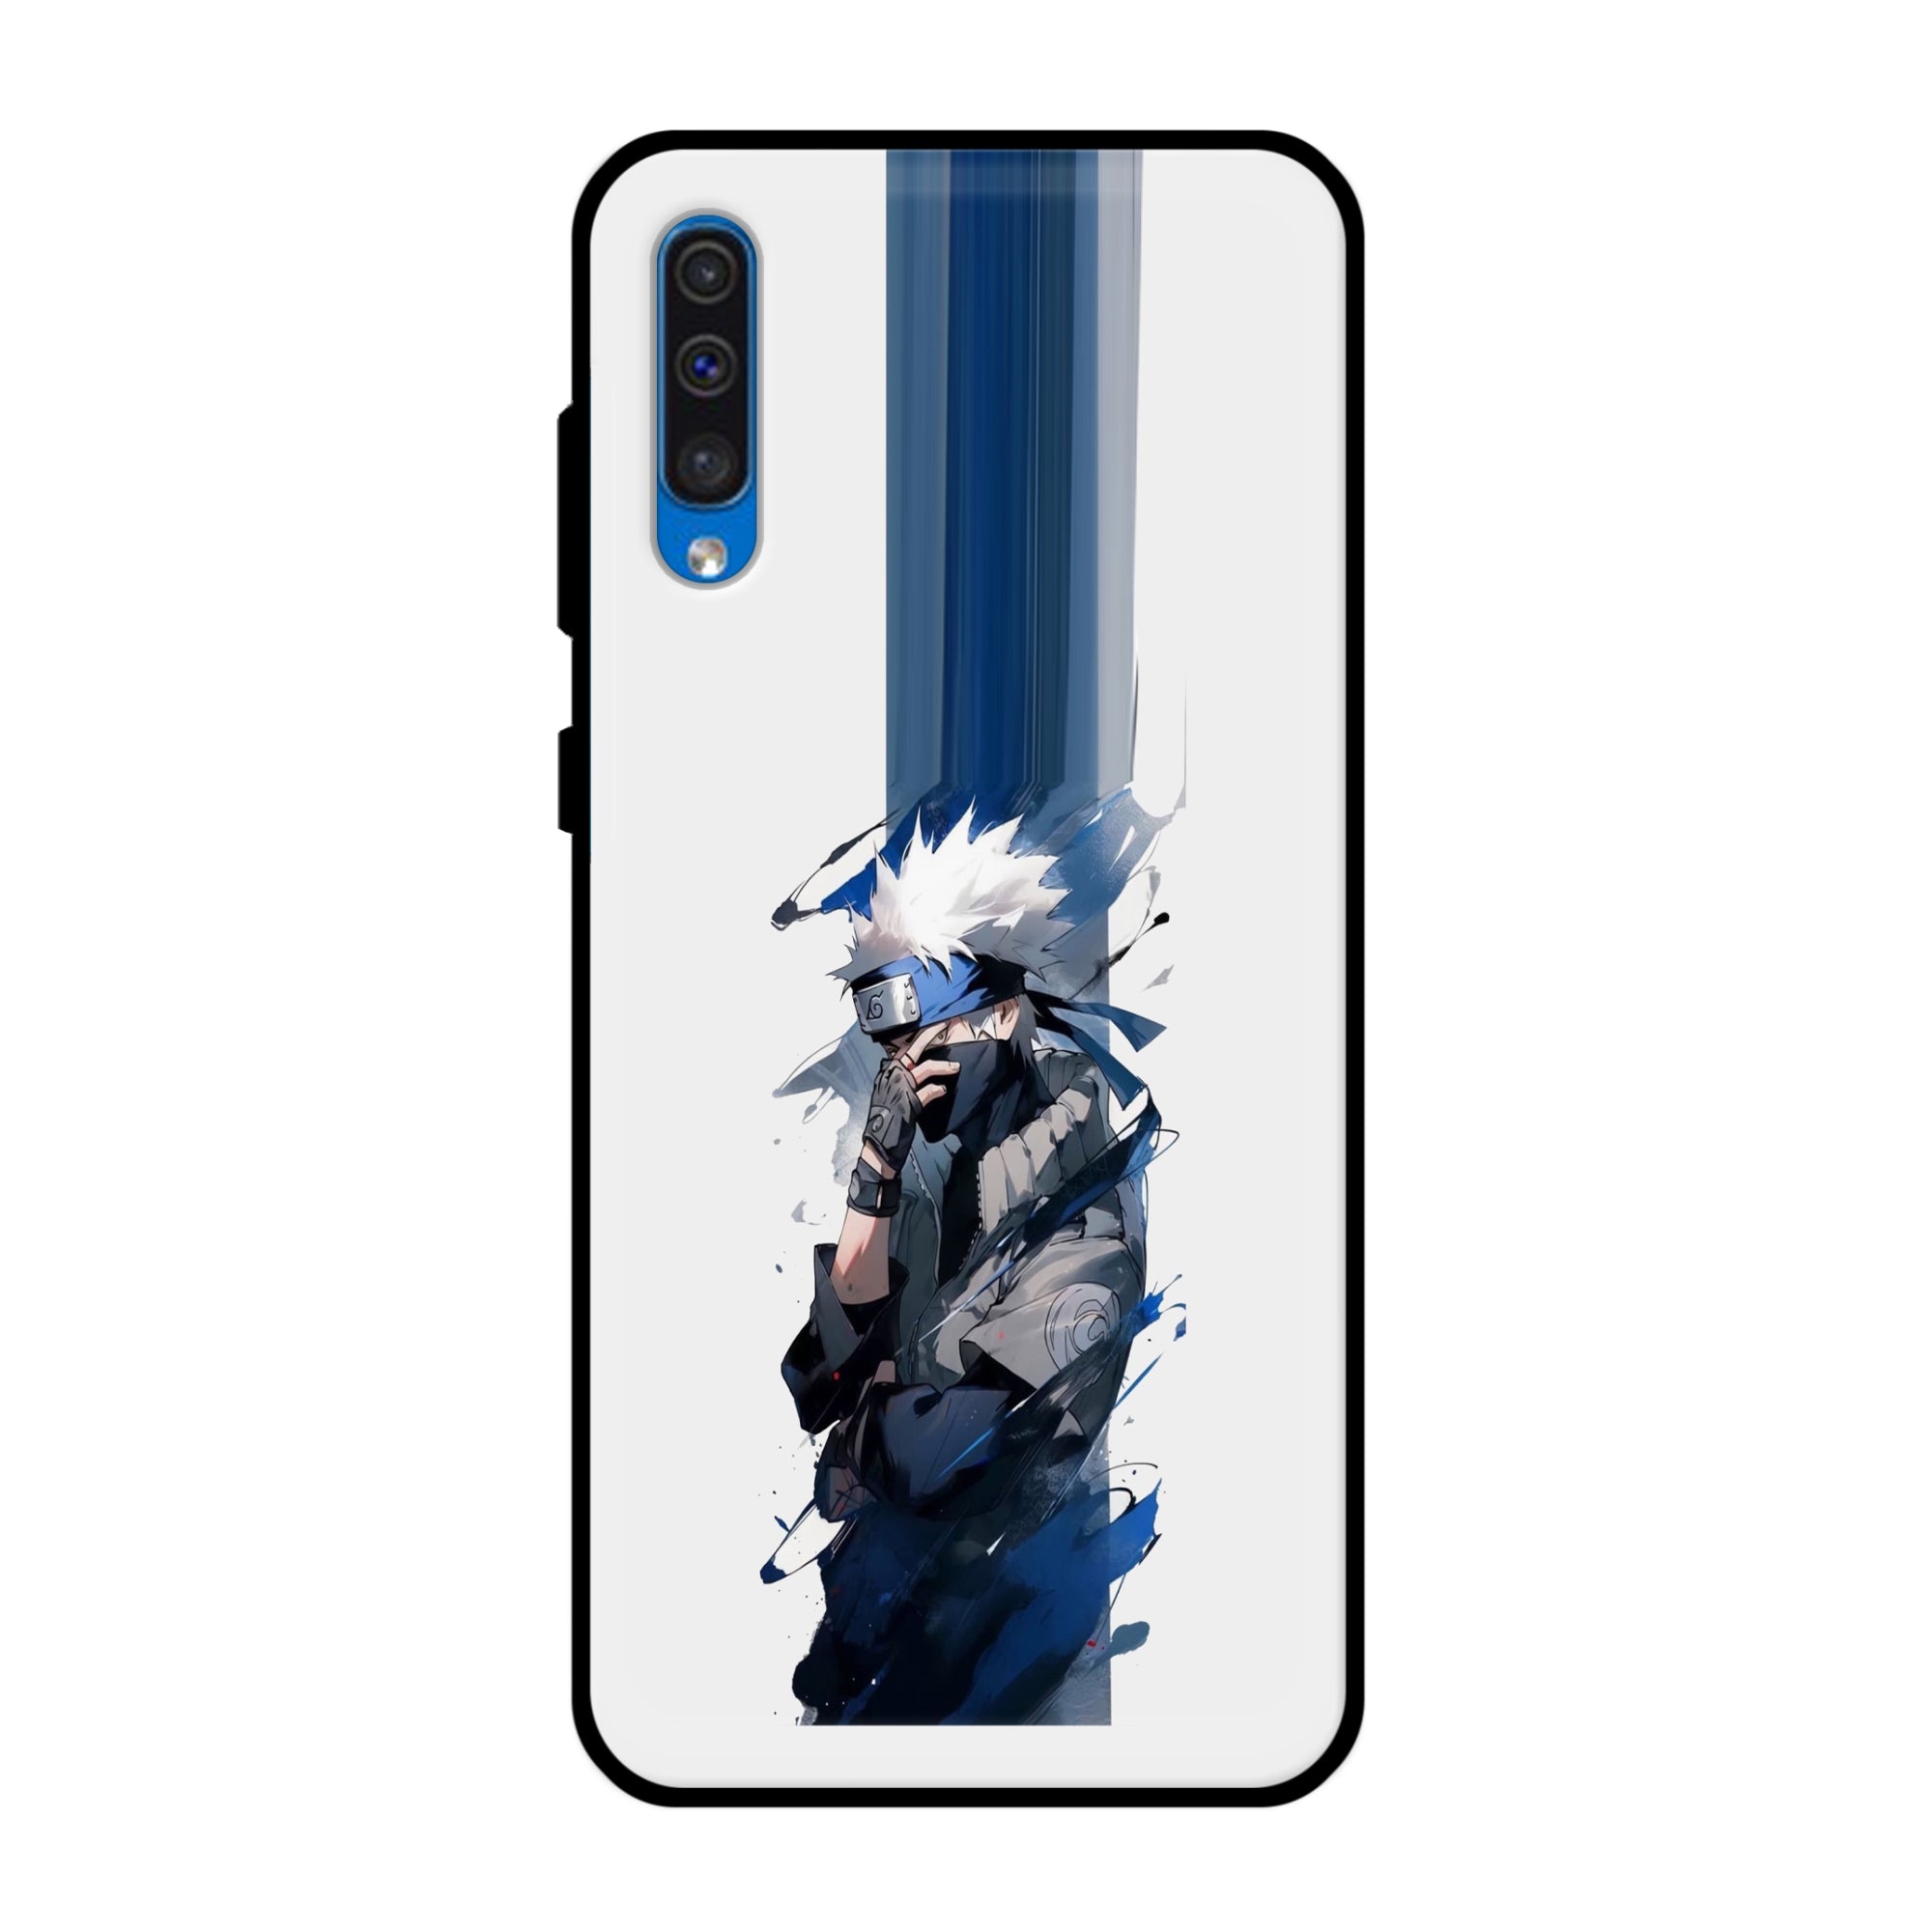 Buy Kakachi Metal-Silicon Back Mobile Phone Case/Cover For Samsung Galaxy A50 / A50s / A30s Online